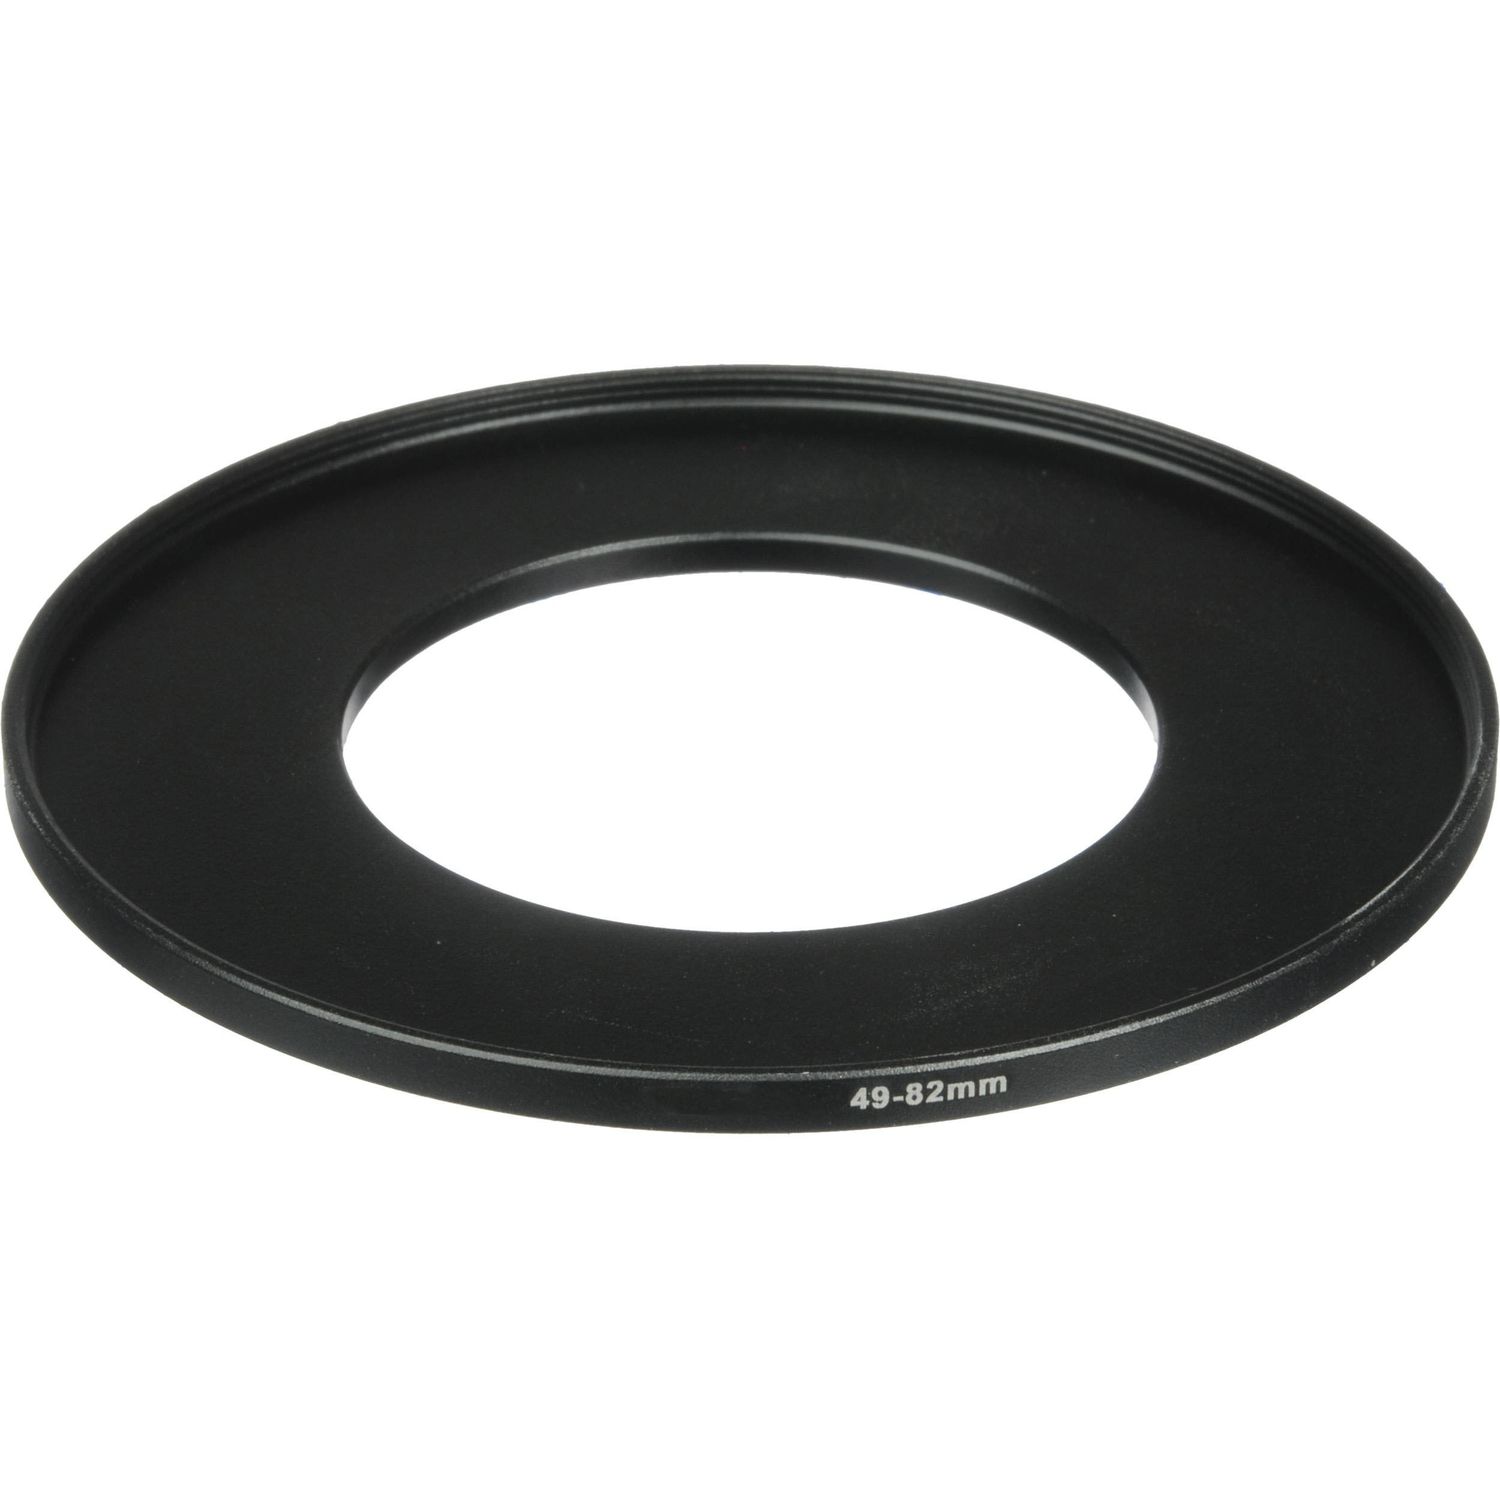 Focus Step Up Ring 49-82mm